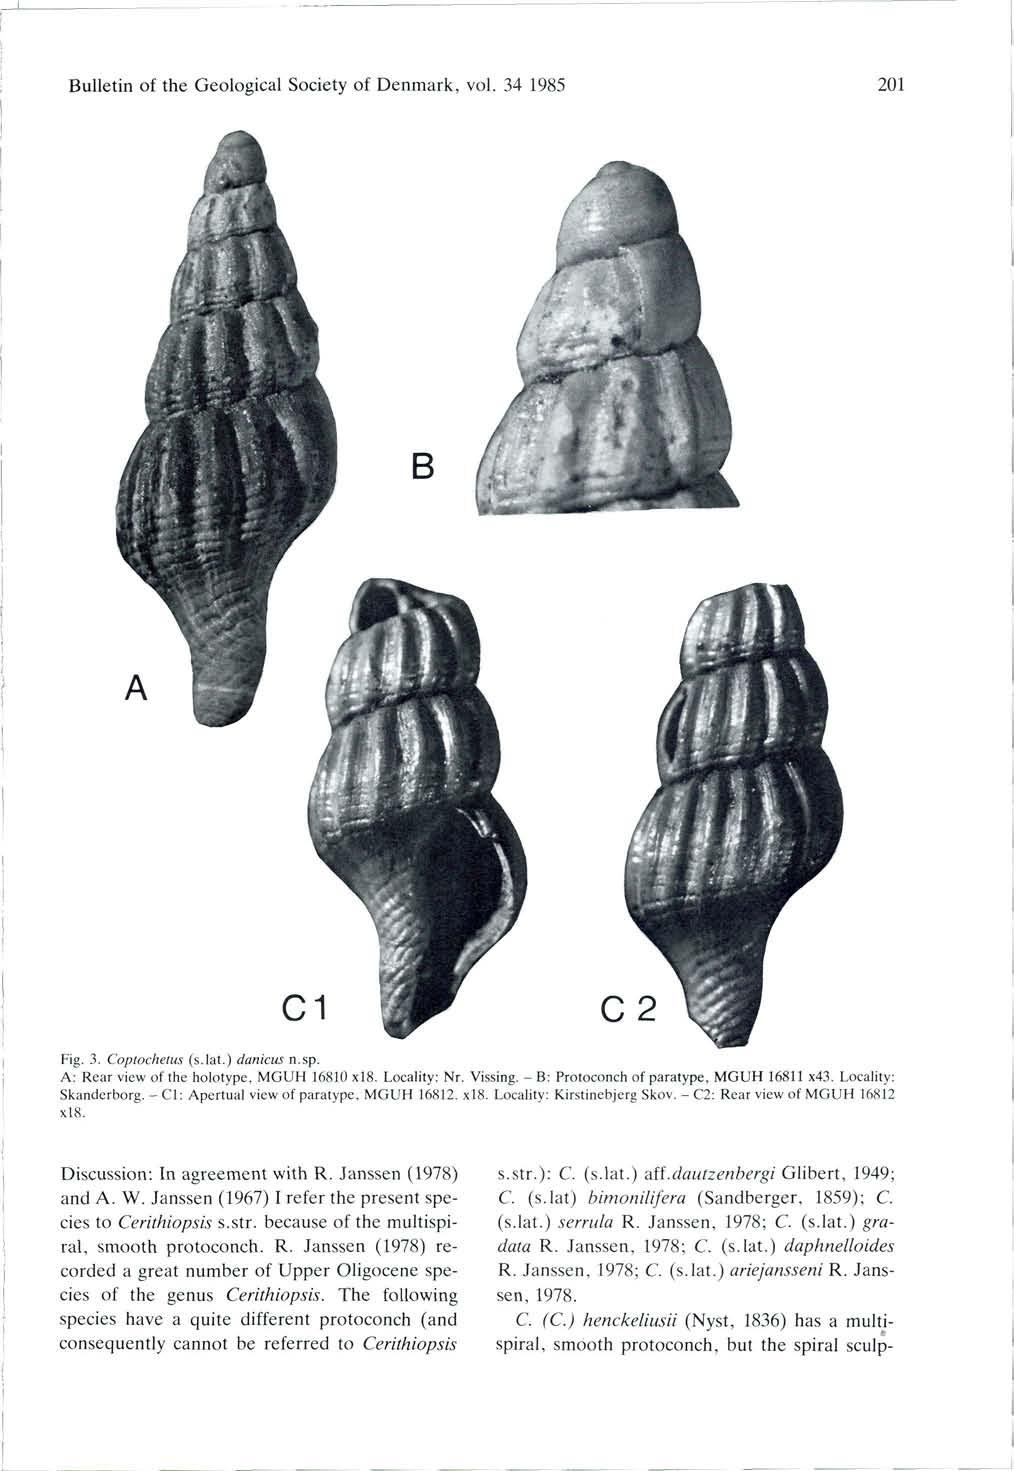 Bulletin of the Geological Society of Denmark, vol. 34 1985 201 Fig. 3. Coptochetus (s.lat.) danicus n.sp. A: Rear view of the holotype, MGUH 16810 xl8. Locality: Nr. Vissing.